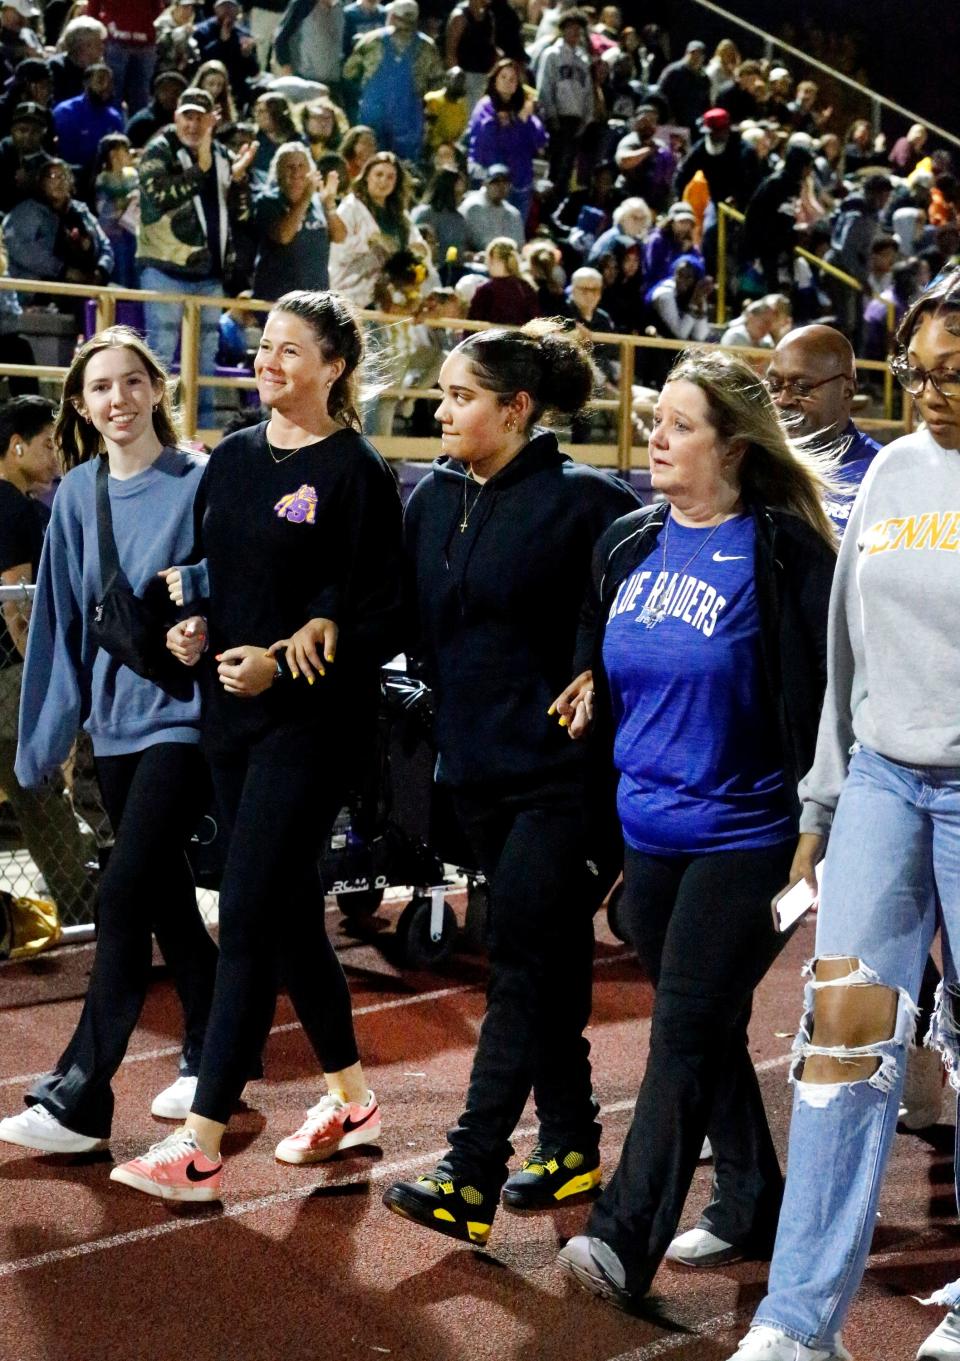 Janae Edmondson, center, walks for the first time in public after losing her legs in an accident less than a year ago along the Smyrna High School sidelines during halftime of the Smyrna football game against Stewarts Creek in Smyrna, Tenn. on Friday, Oct. 13, 2023. Janae Edmondson walks arm in arm with her former high school volleyball coach Katy Bell , left and her mom Francine Edmondson, right. The trio is flanked by former volleyball teammates left Libby Outlaw and Madison Robinson, right. The crowd reacts in the background.